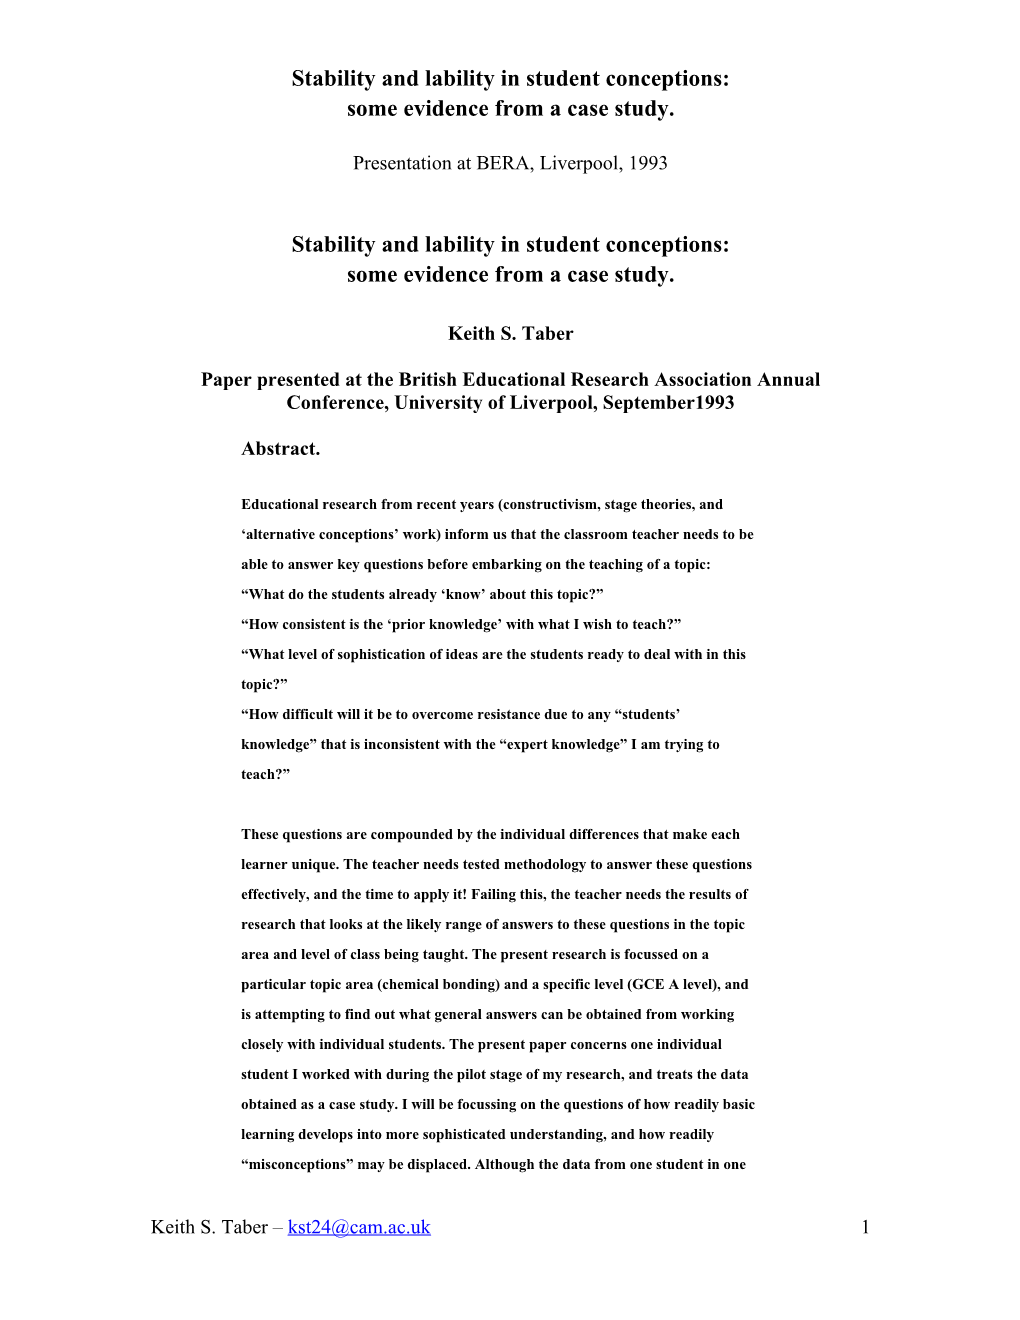 Stability and Lability in Student Conceptions